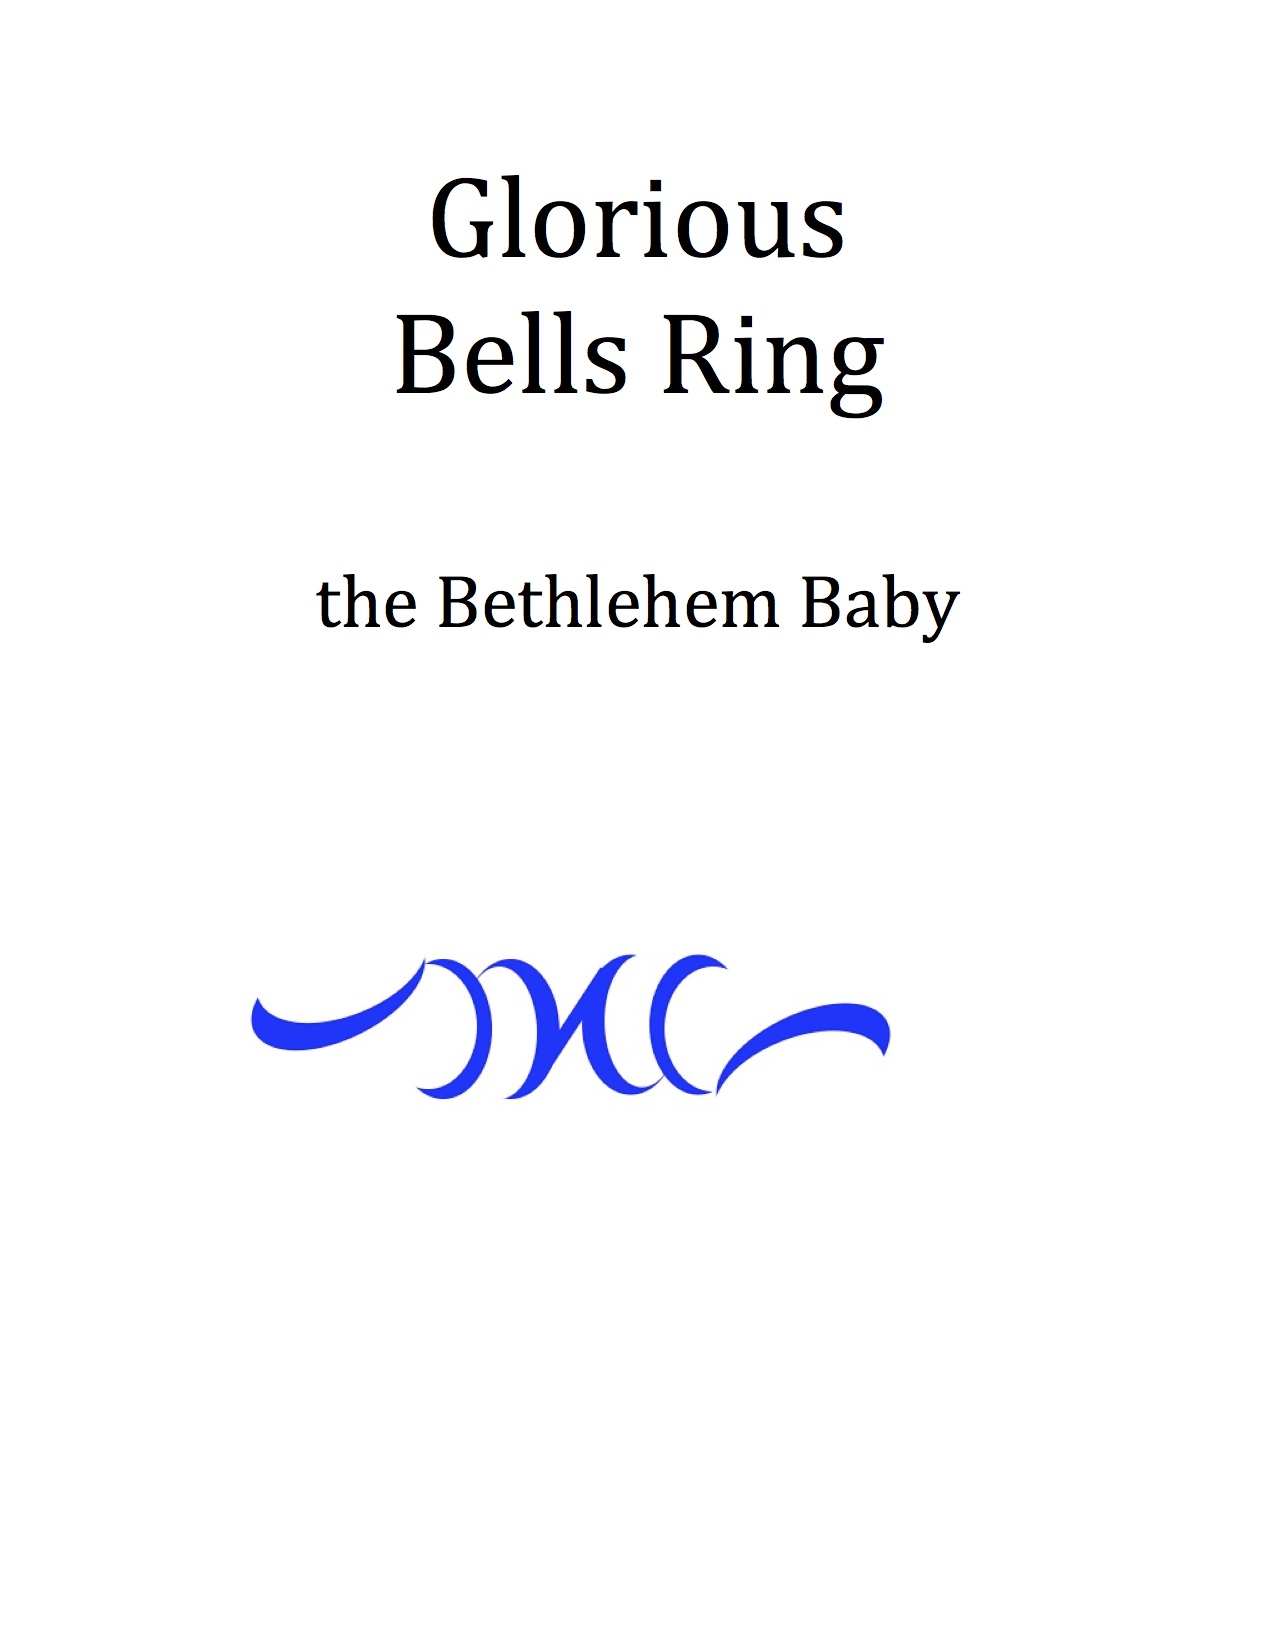 Glorious_bells_ring_title